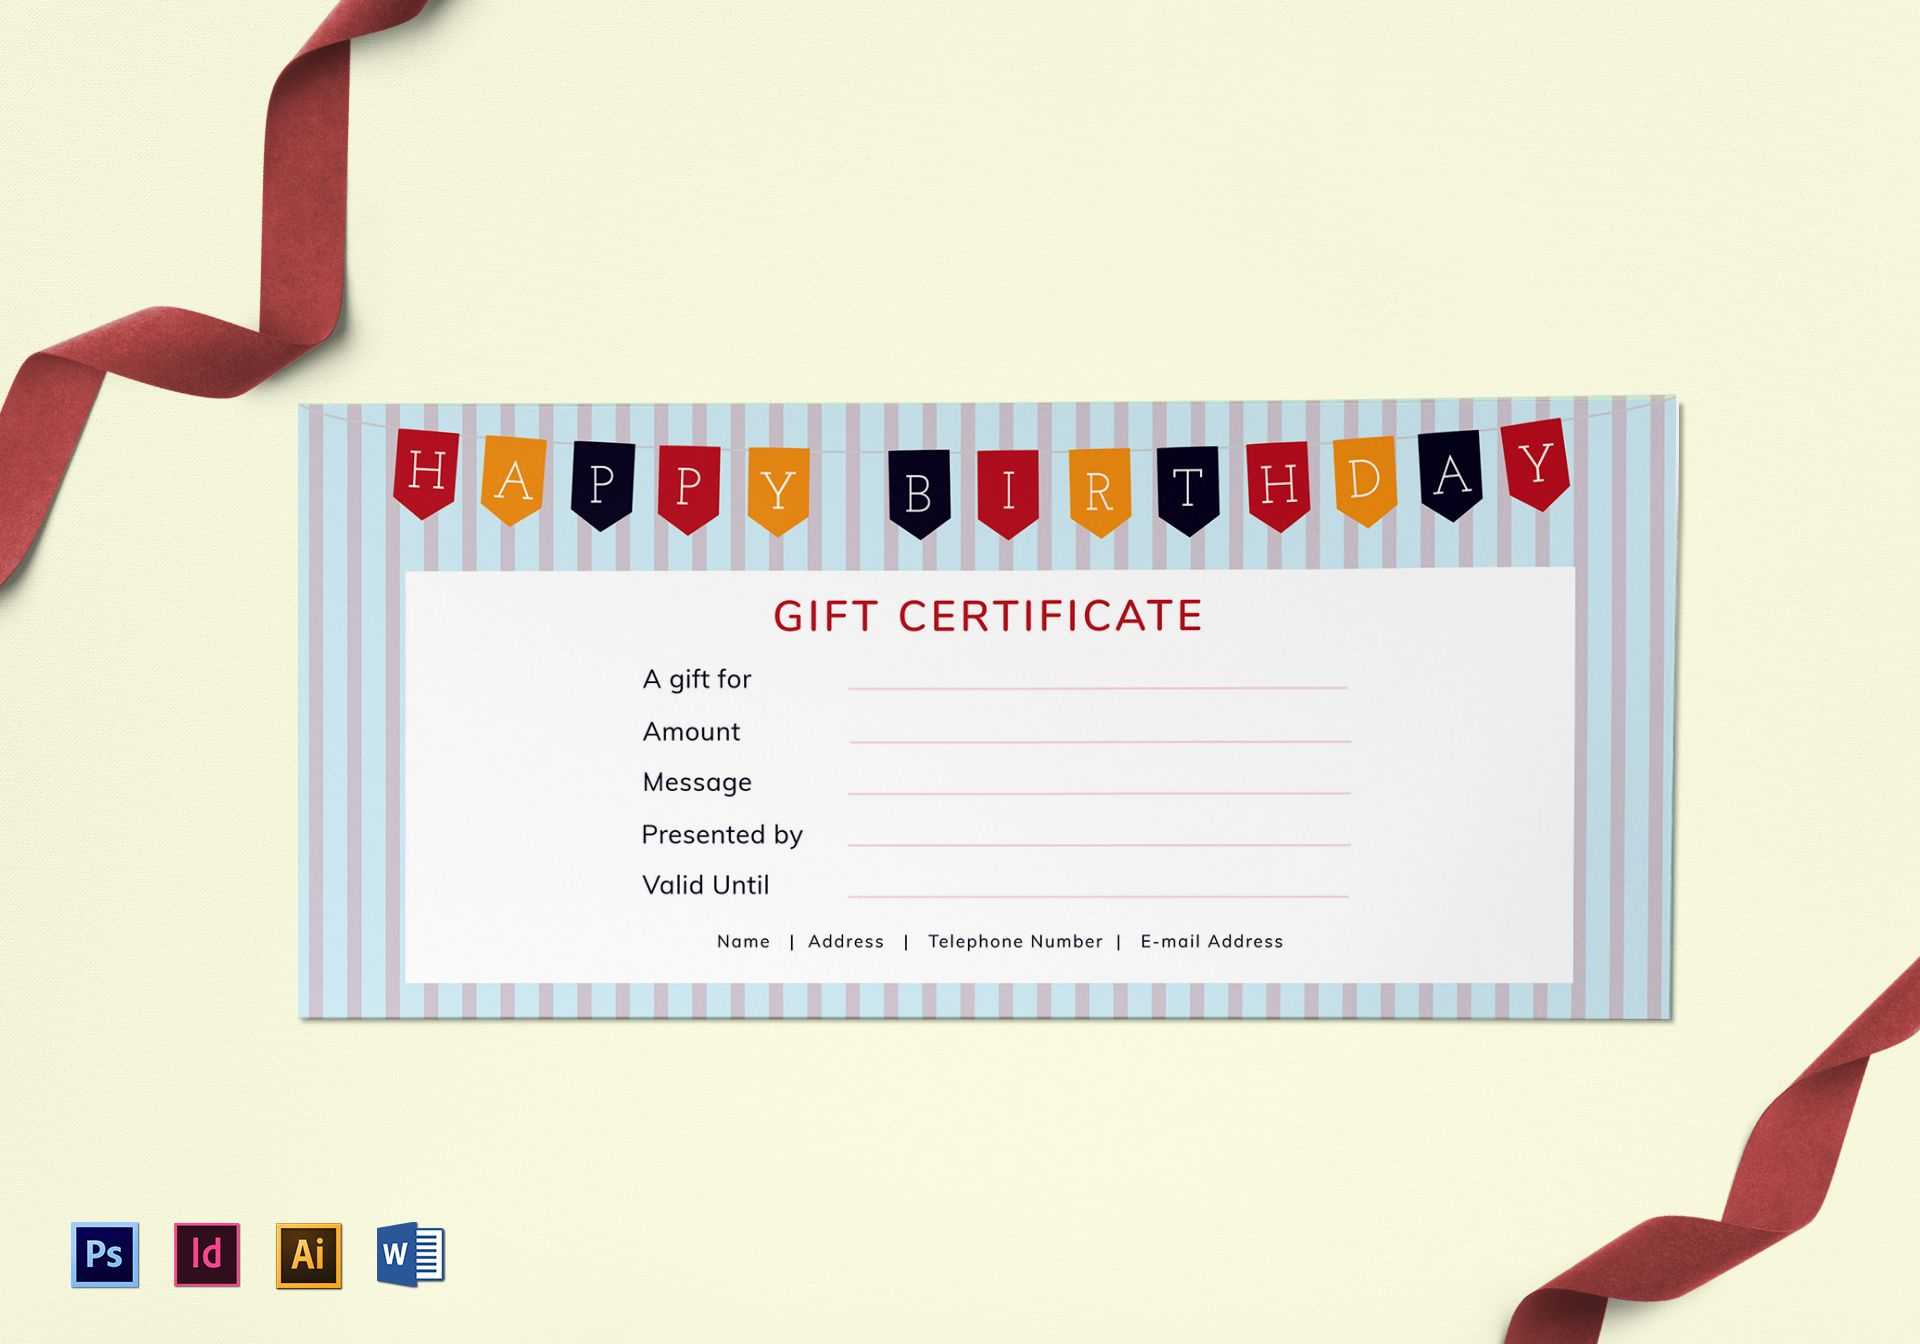 Happy Birthday Gift Certificate Template Regarding Gift Certificate Template Photoshop